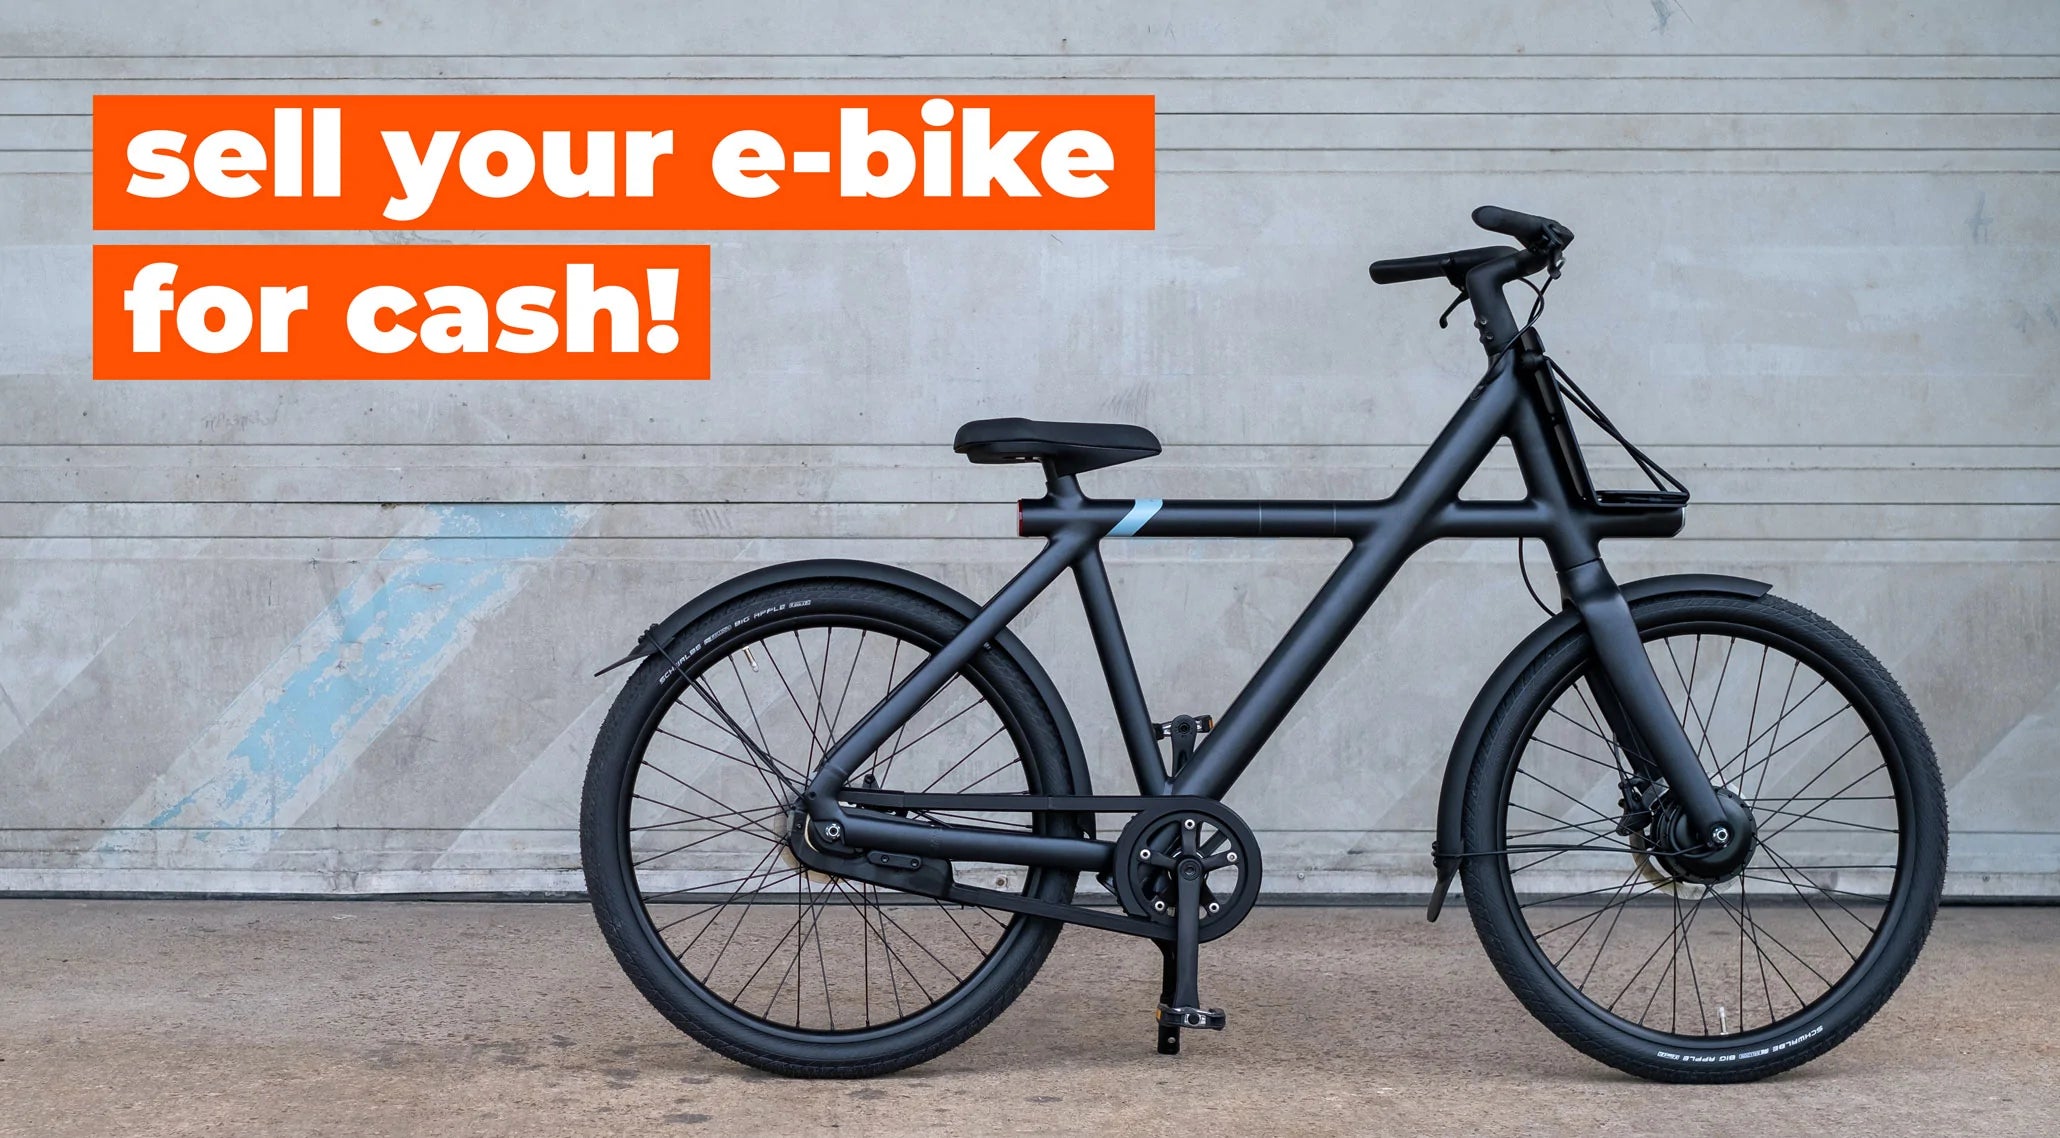 E-Bike Sell/Trade-in, Get Cash For Your Electric Bike Moose